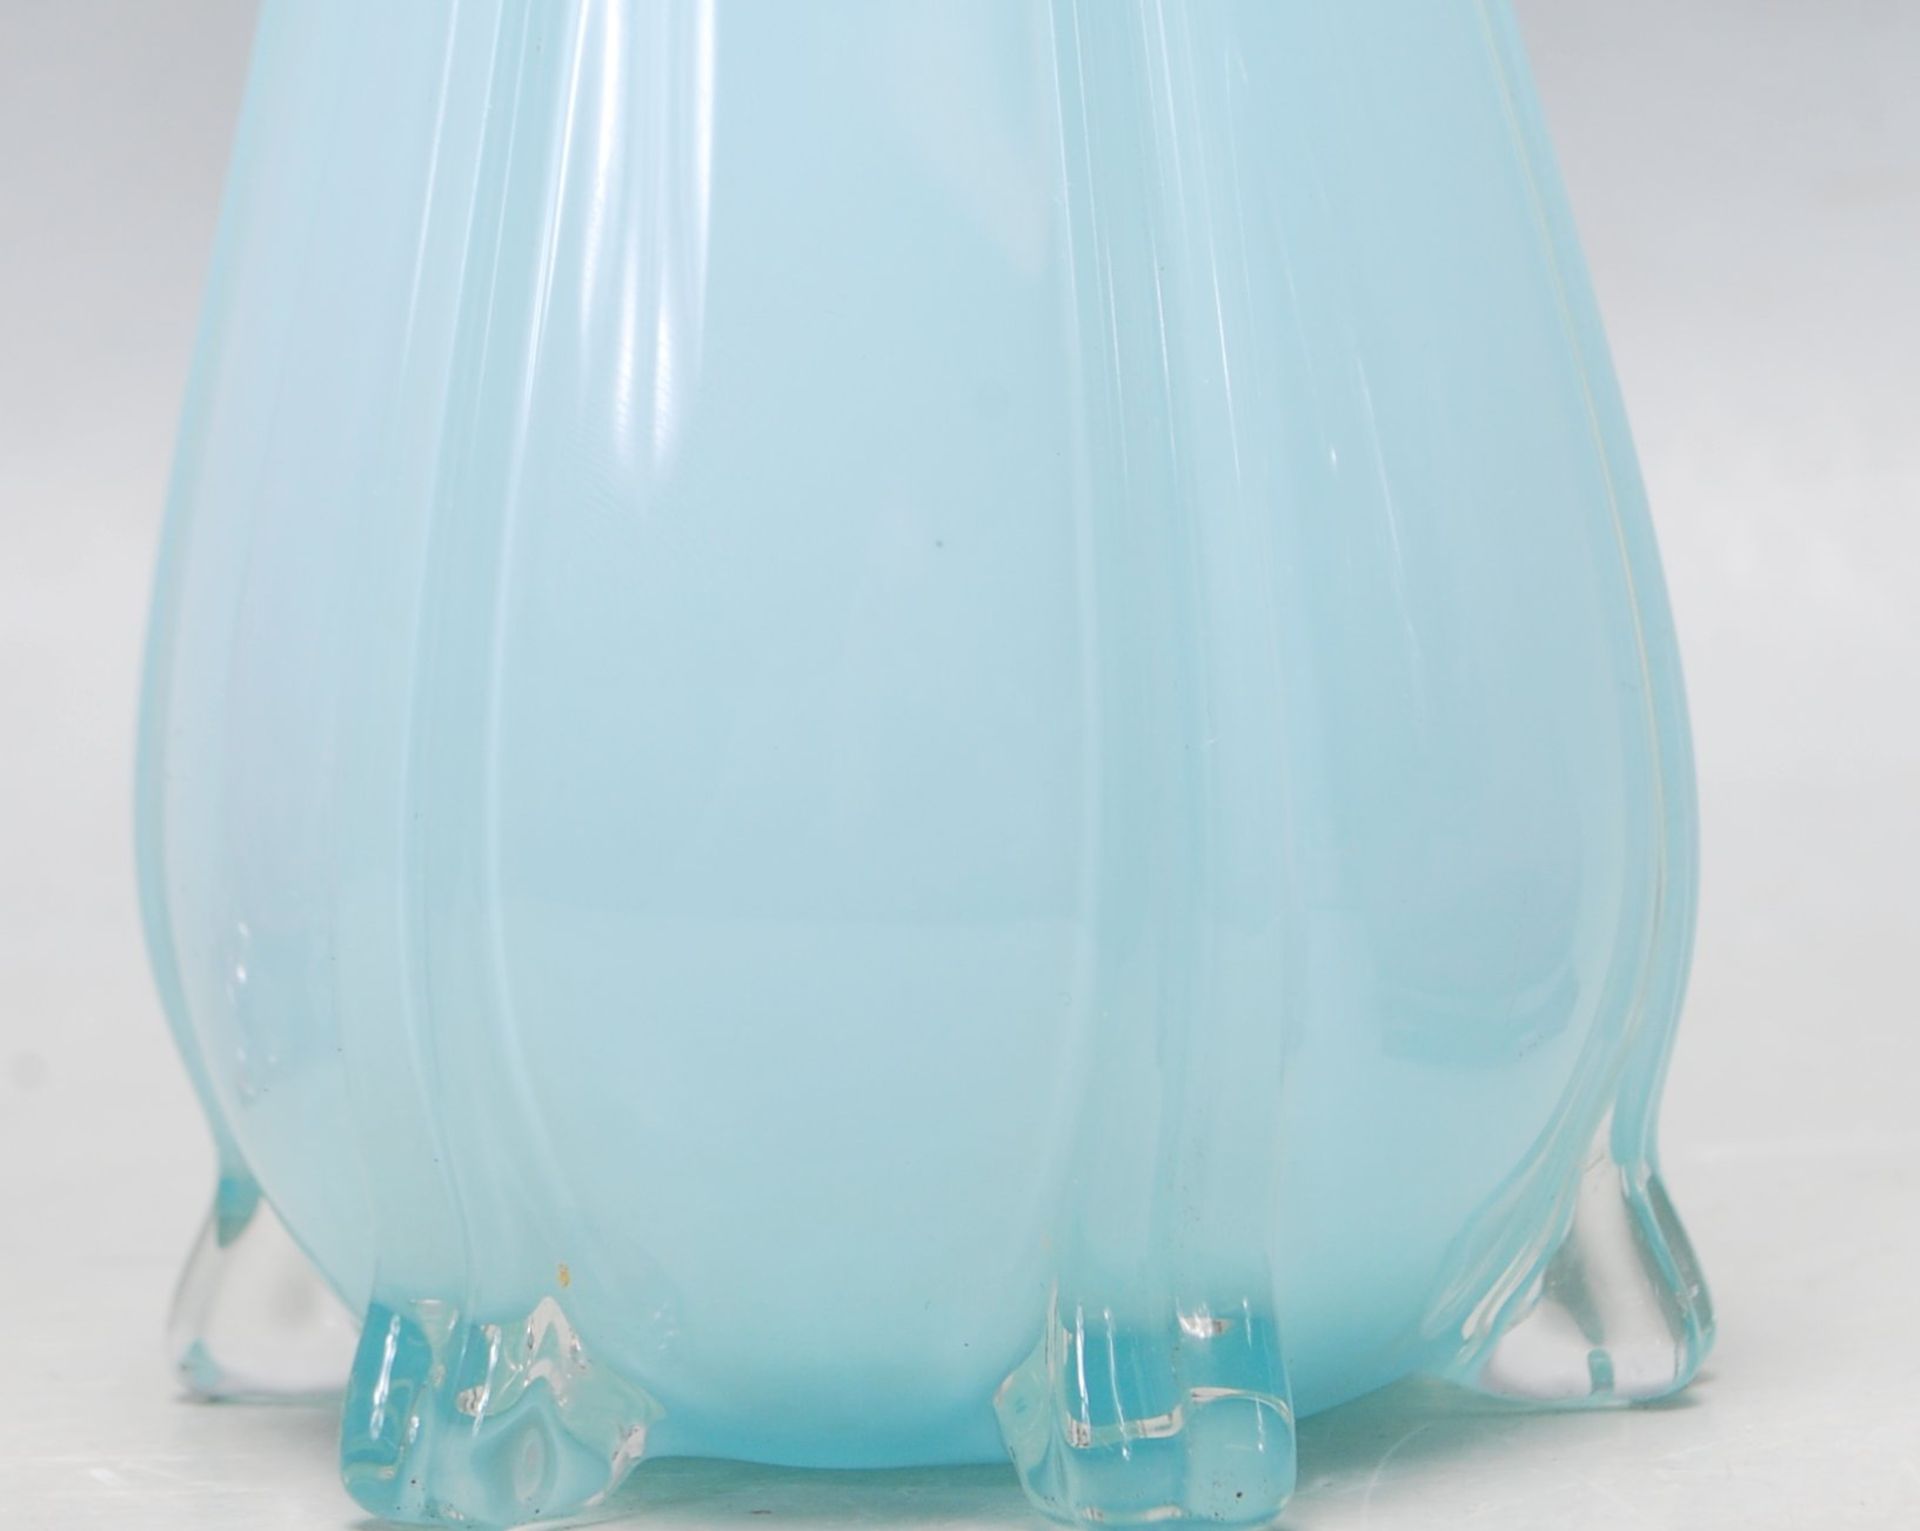 FOUR EARLY 20TH CENTURY STUDIO ART GLASS BALUSTER VASES - Image 3 of 6